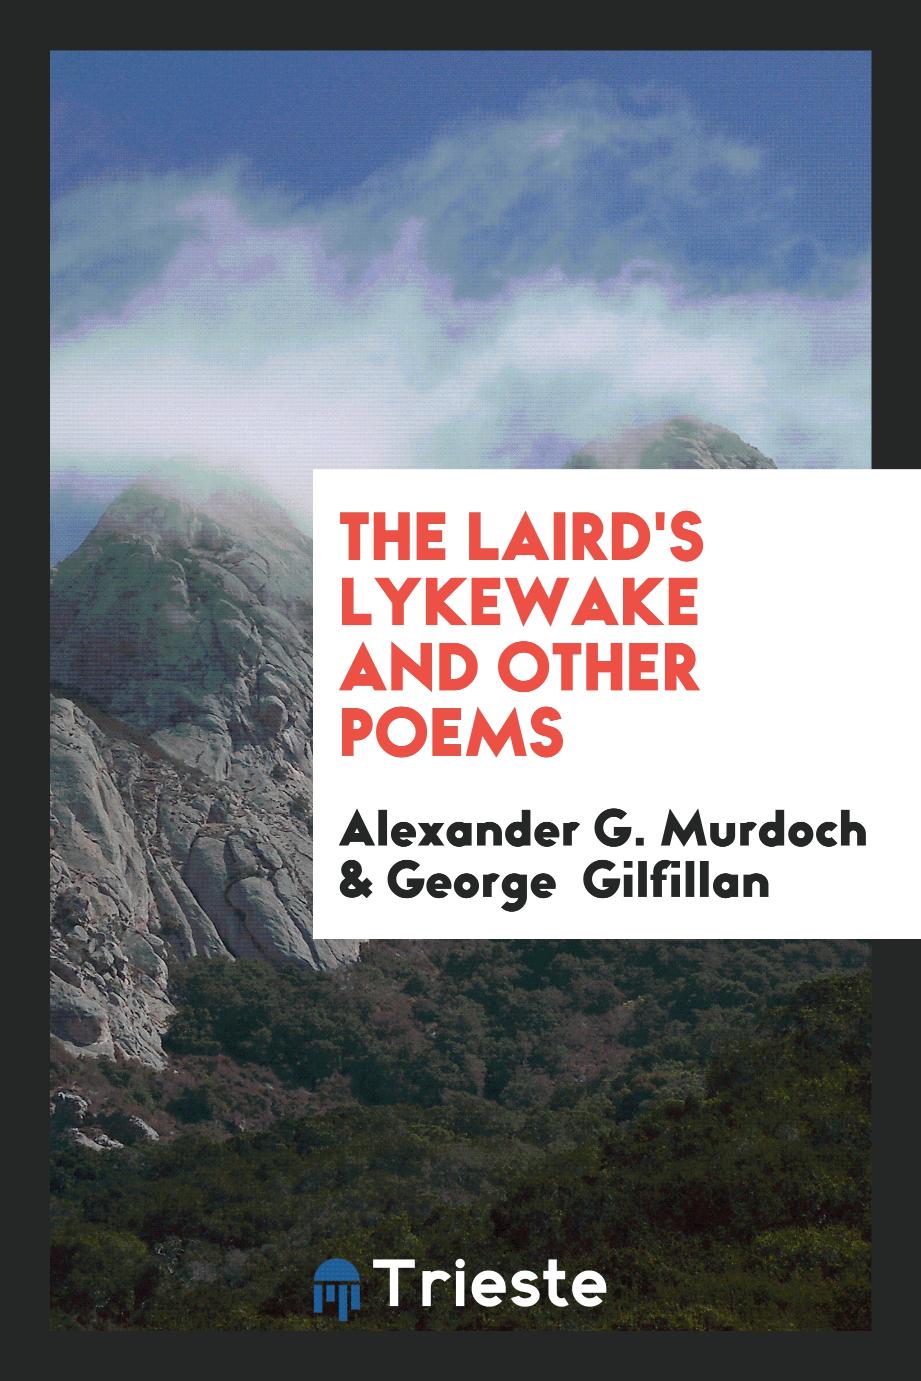 Alexander G. Murdoch, George Gilfillan - The Laird's Lykewake and Other Poems